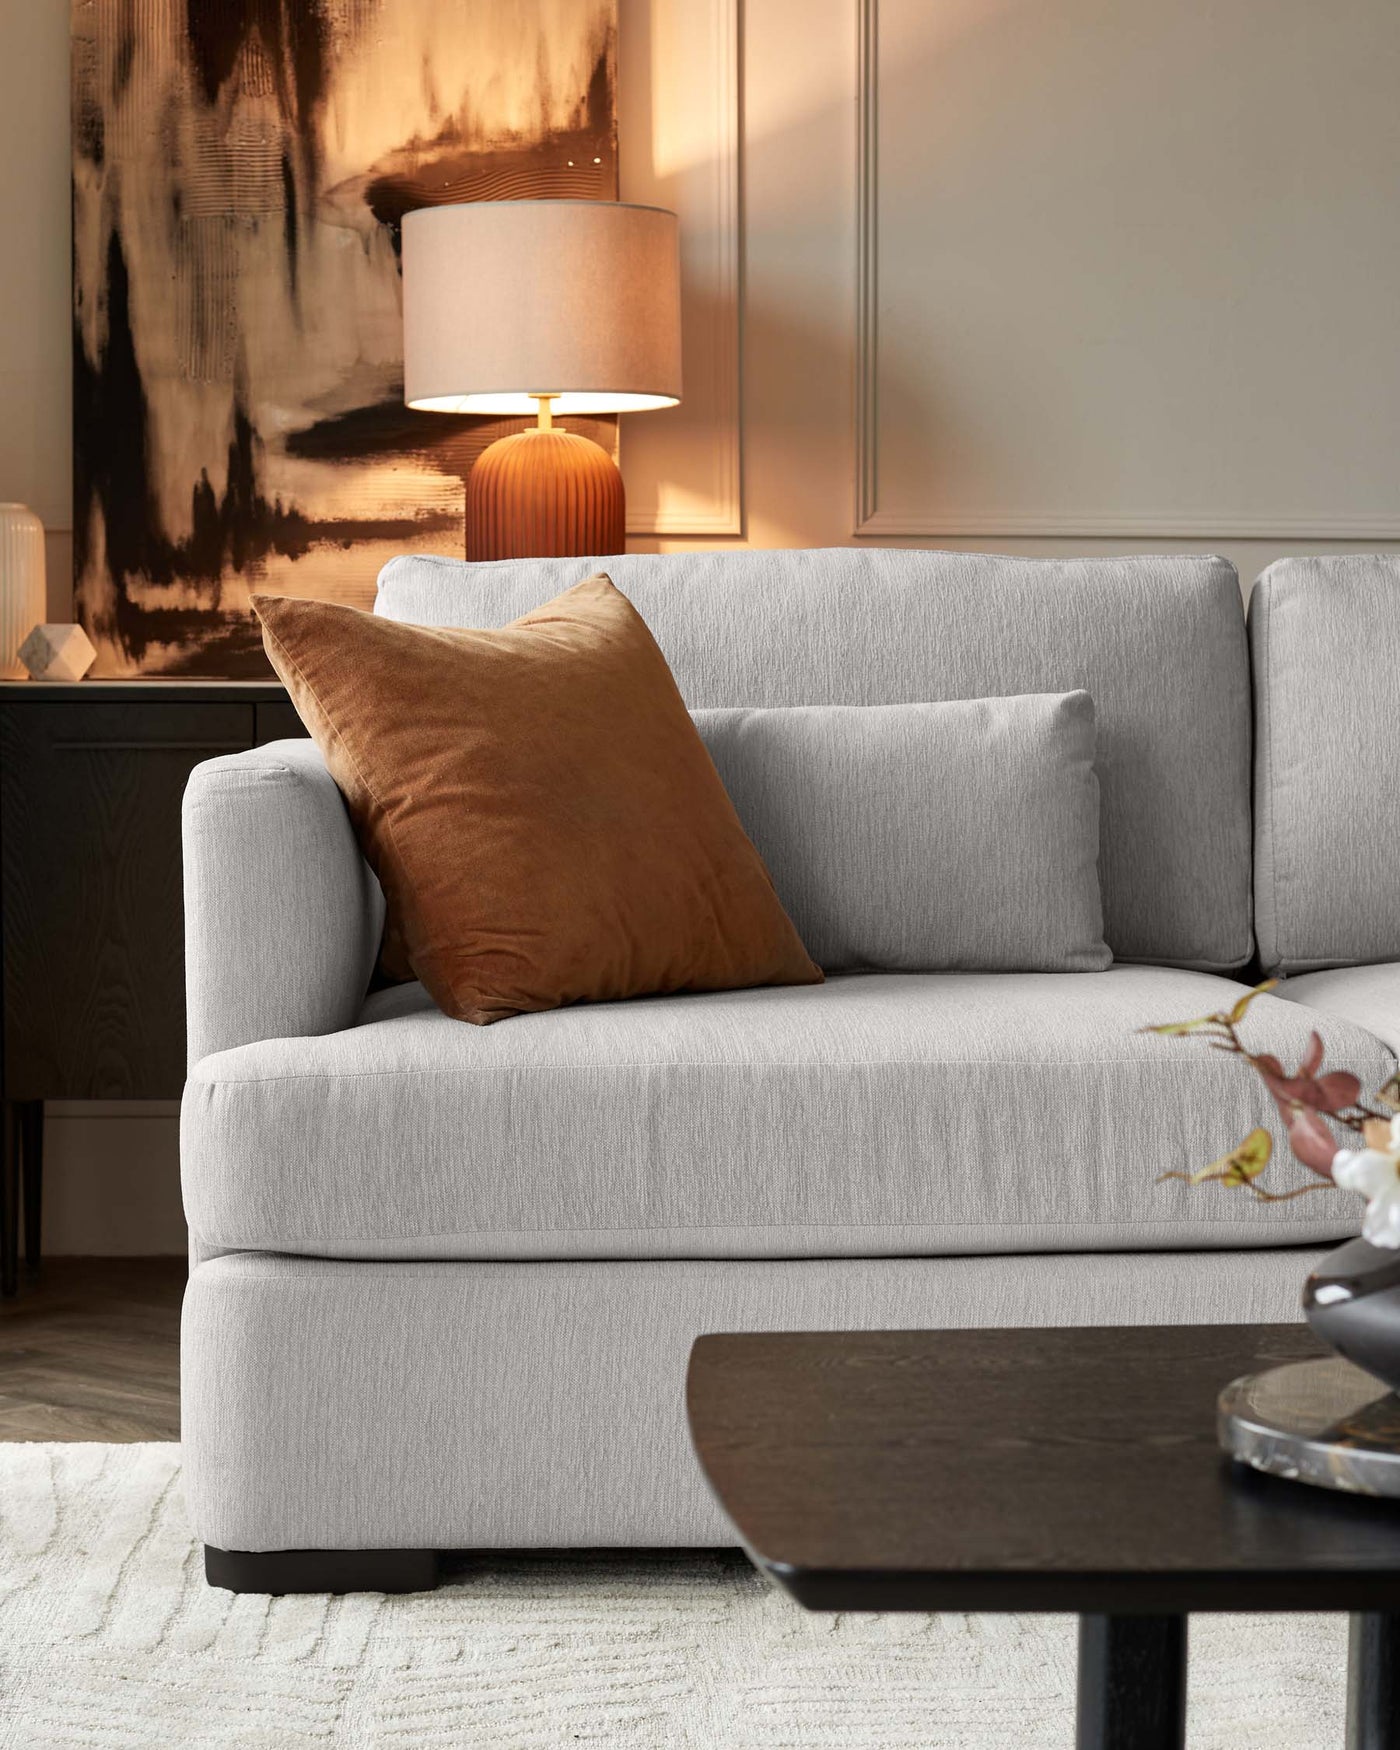 A contemporary light grey fabric sofa with clean lines, featuring plush seat cushions and a neatly tailored aesthetic, complemented by a warm-toned brown velvet throw pillow. Next to the sofa is a dark wood side table with a rounded geometric base, supporting a stylish cylindrical table lamp with a beige shade and ribbed, amber-hued base. The elegant setup is accented by a textured cream area rug beneath the furniture.